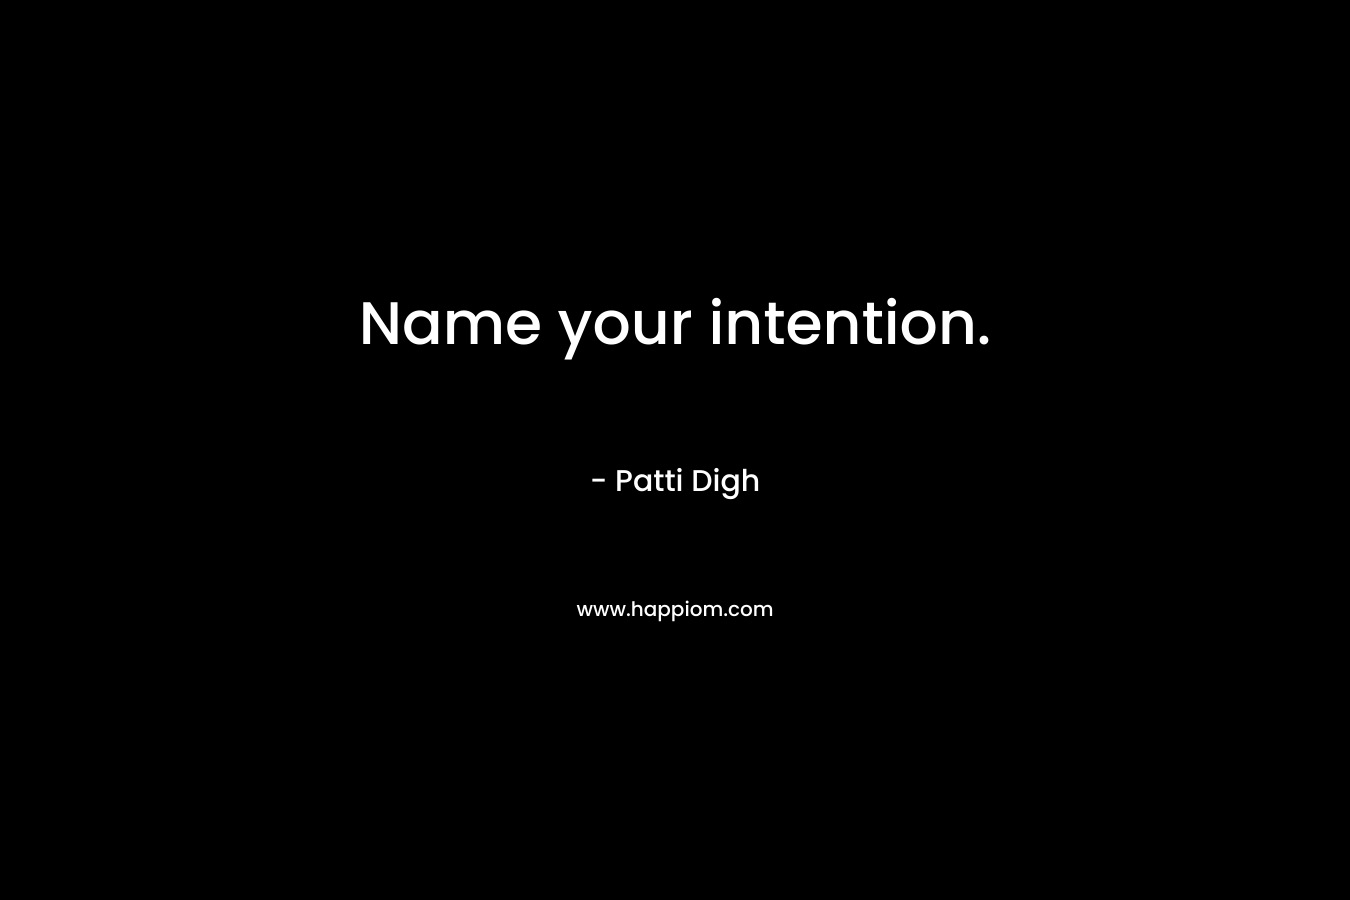 Name your intention.